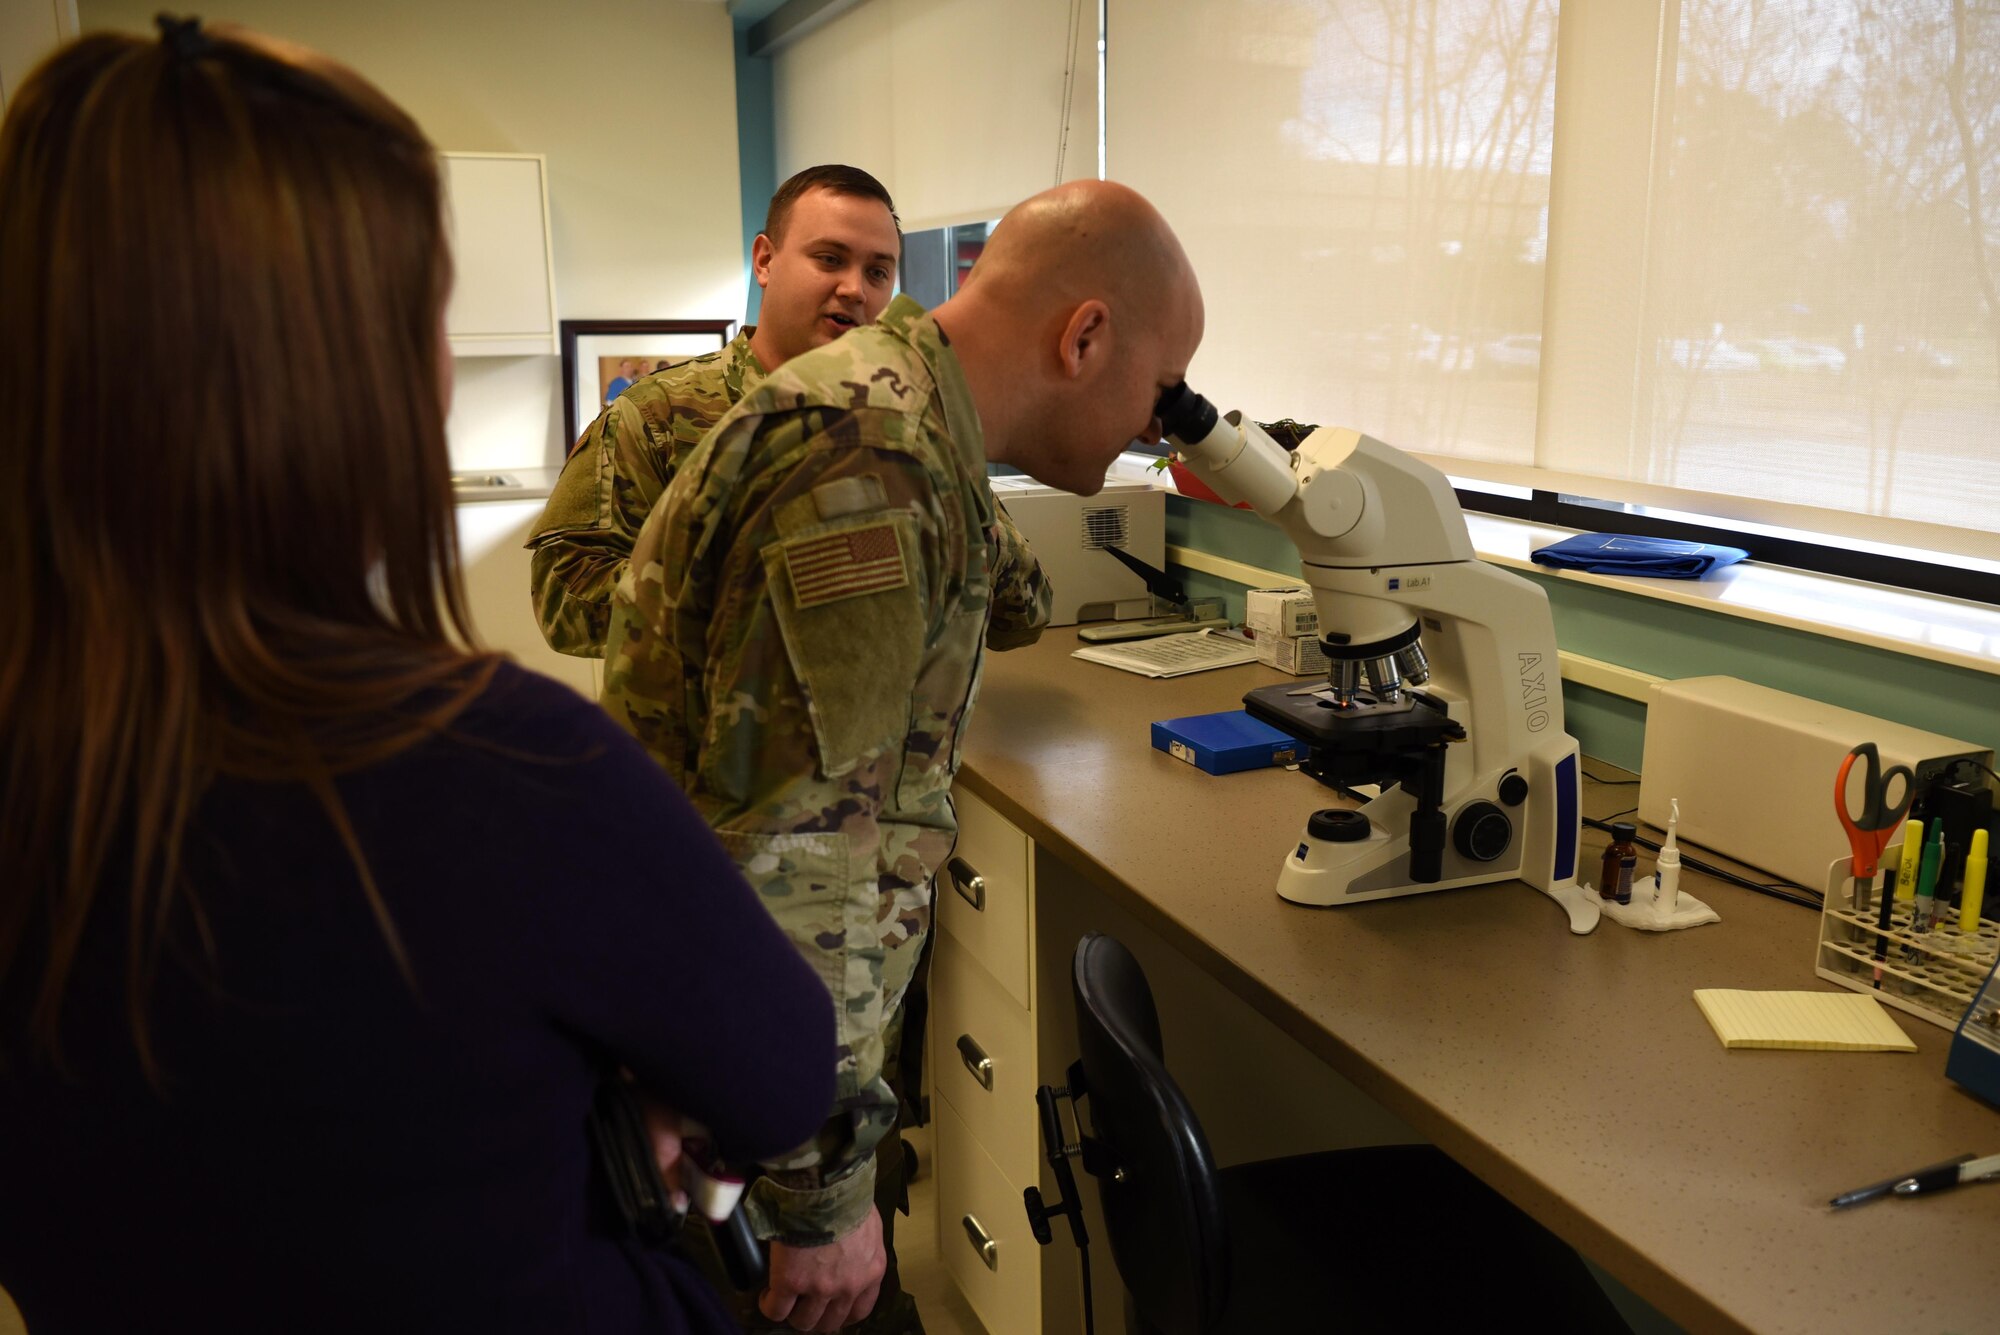 Chief Master Sgt. Trevor James, 14th Flying Training Wing command chief, looks through a binocular microscope in the laboratory department of the 14th Medical Group, Jan. 17, 2020, on Columbus Air Force Base, Miss. Binocular microscopes are optical microscopes with two eyepieces to ease viewing, increase depth perception and cut down eye strain. (U.S. Air Force photo by Airman 1st Class Jake Jacobsen)